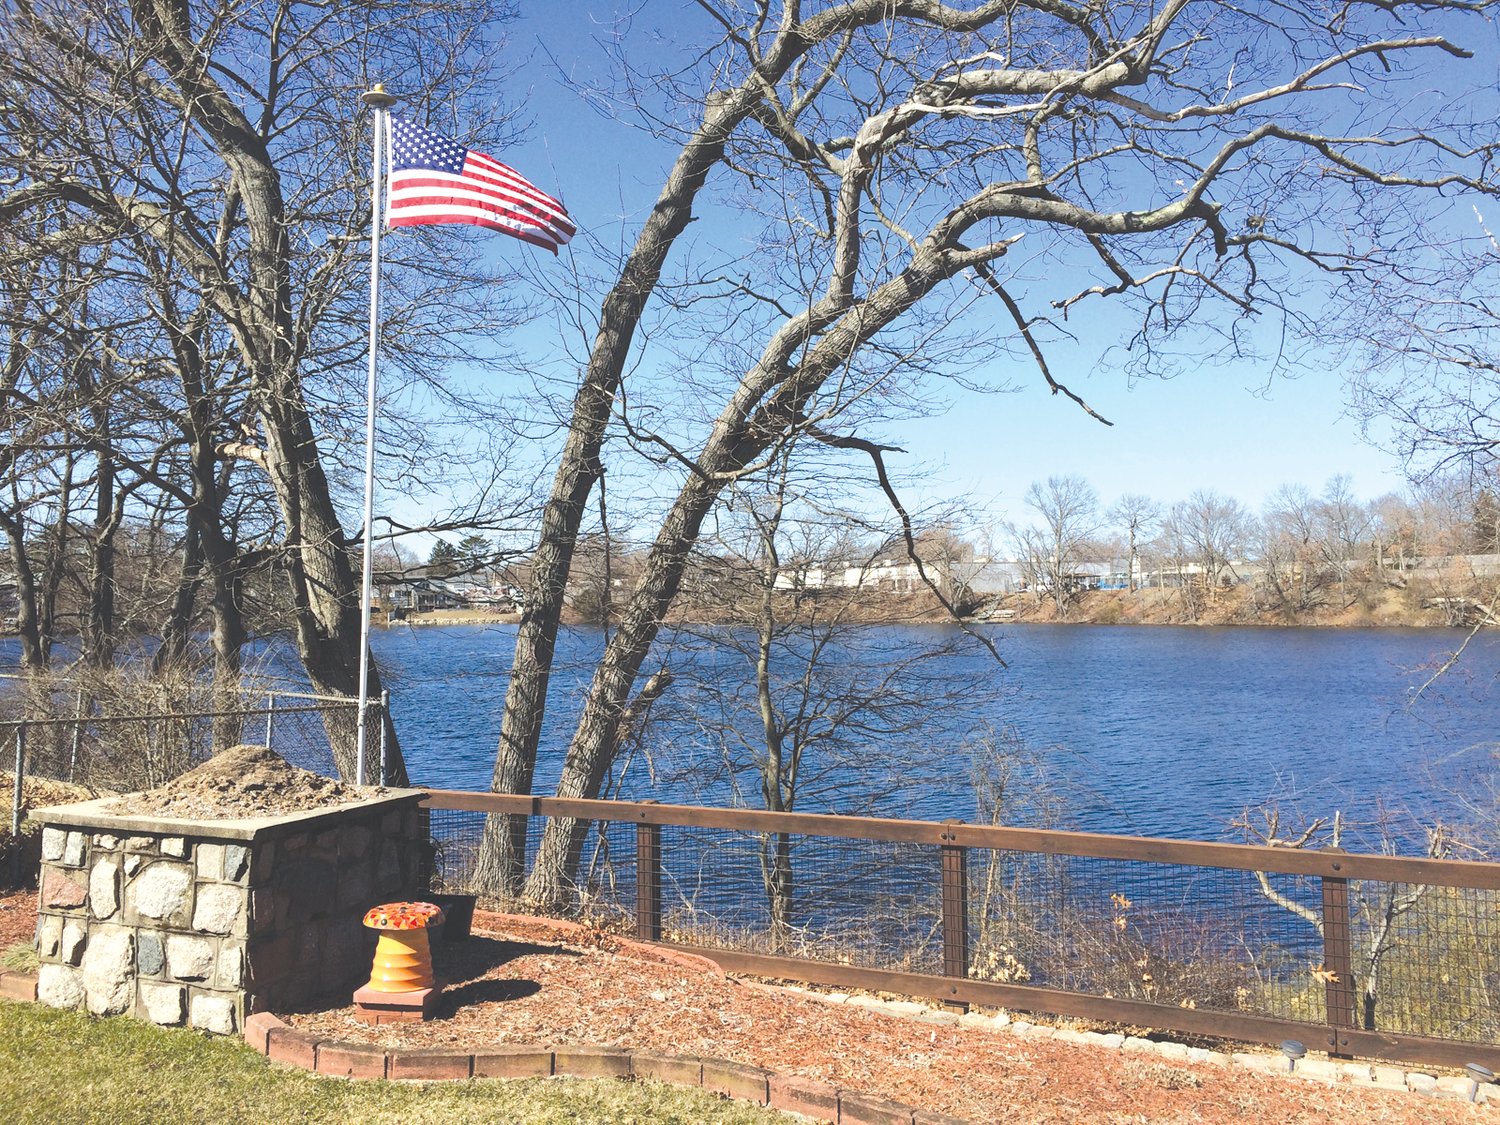 THE VIEW TODAY: Dave Bouchard provided this photo of Sand Pond, with flag flying, from his backyard looking north west at Pond Plaza. The self-storage unit being proposed for the site would be twice the height and extend to the right.